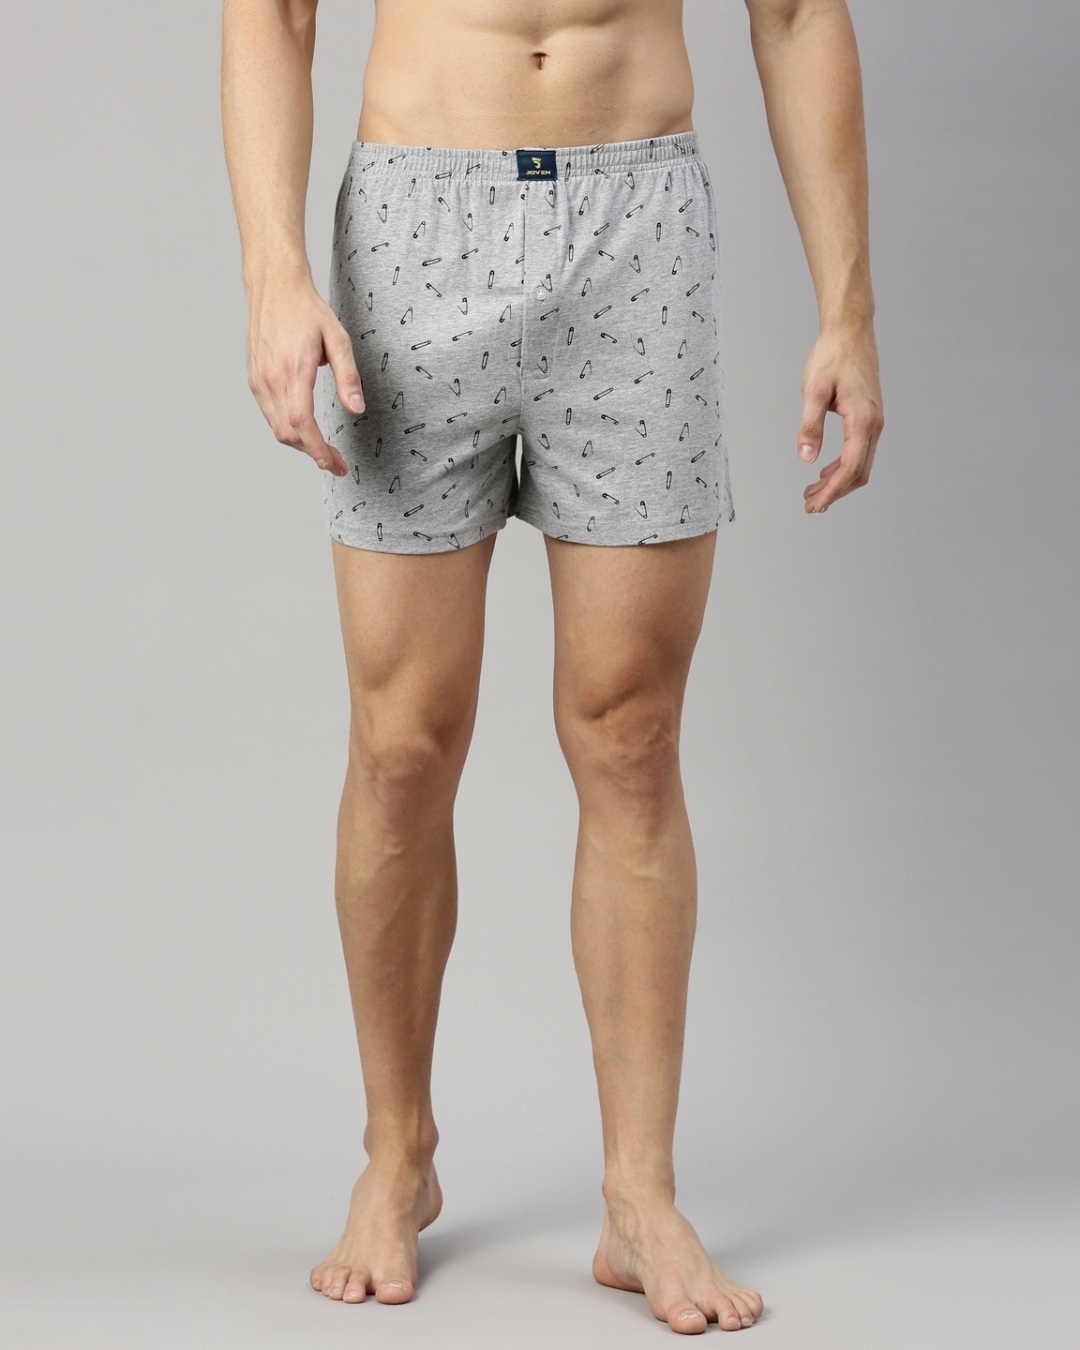 Shop Men's Black & Grey All Over Printed Cotton Boxers (Pack of 2)